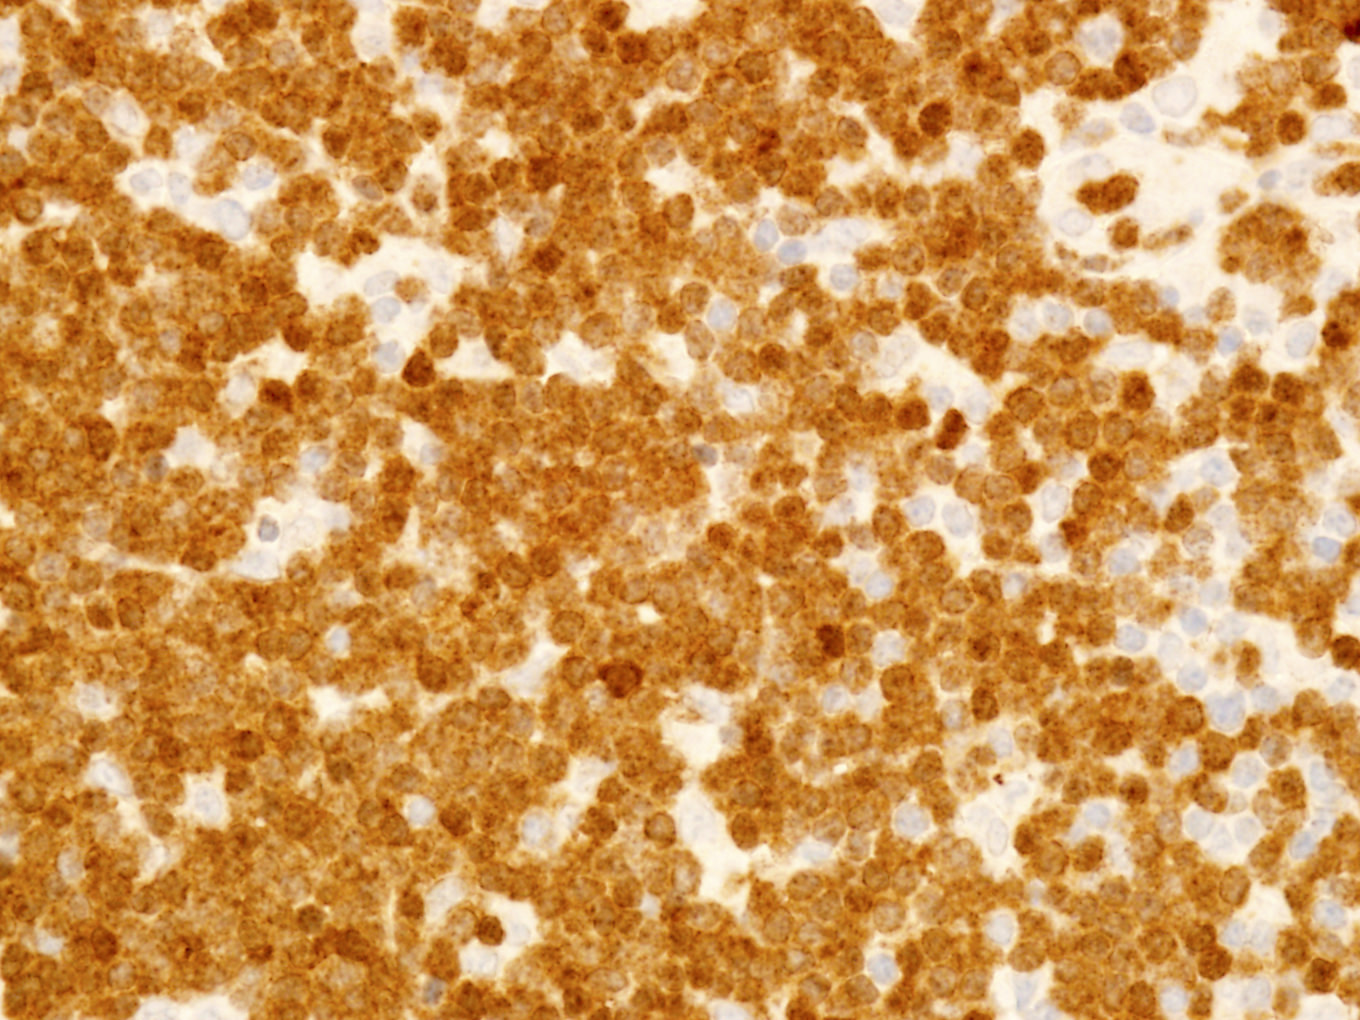 Uniform, strong TCL1A staining